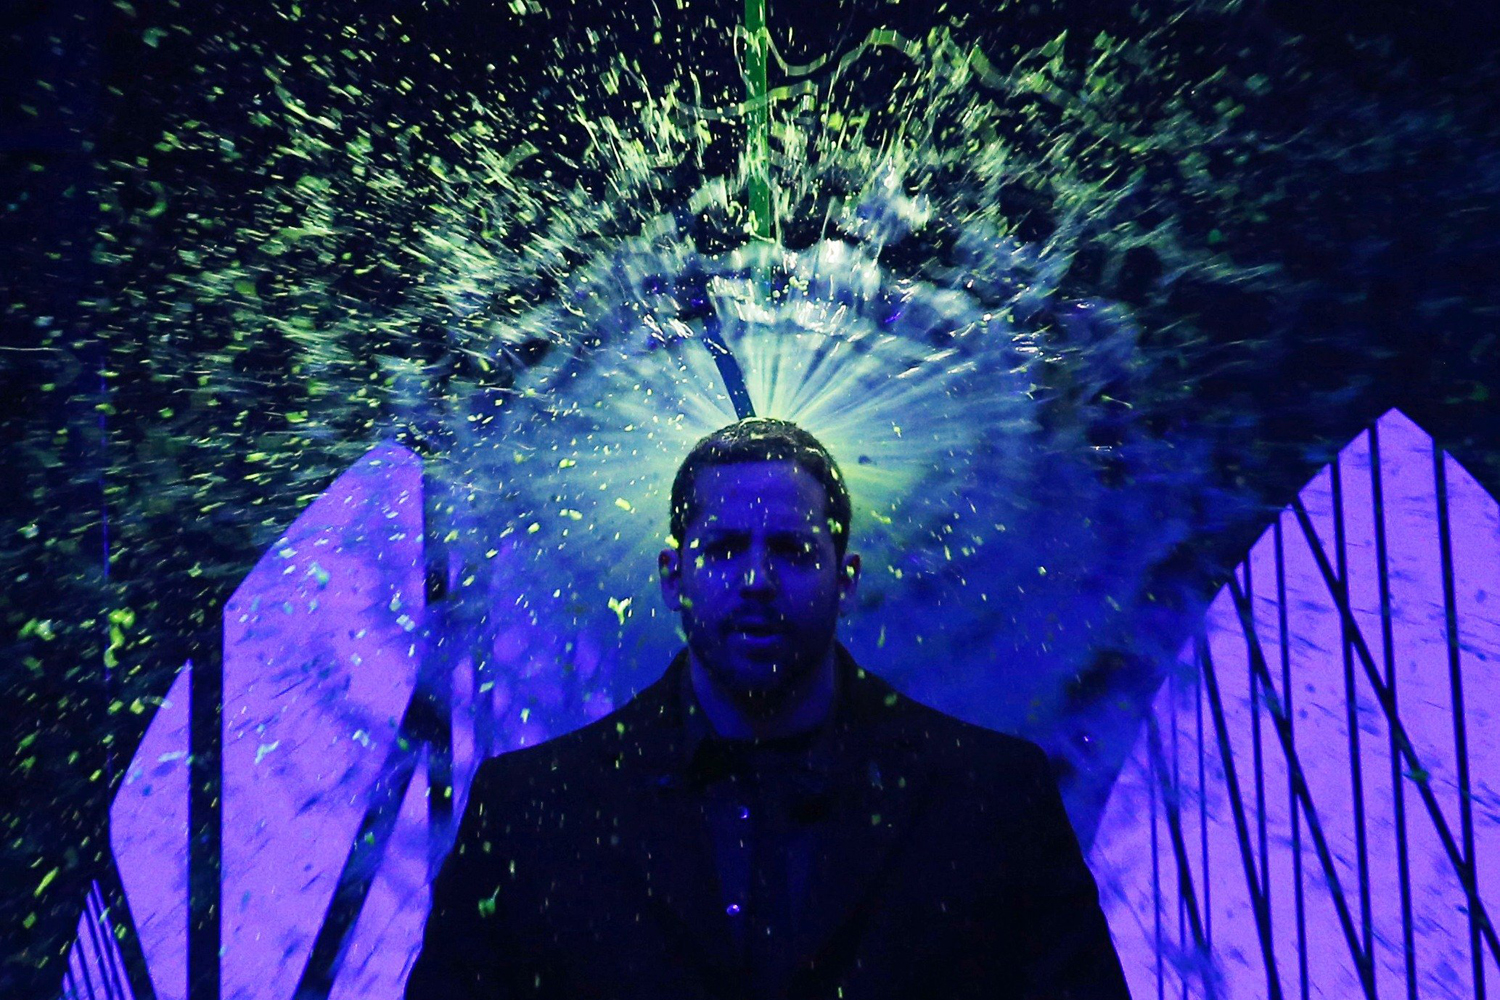 David Blaine gets slimed on stage at the 27th Annual Kids' Choice Awards in Los Angeles